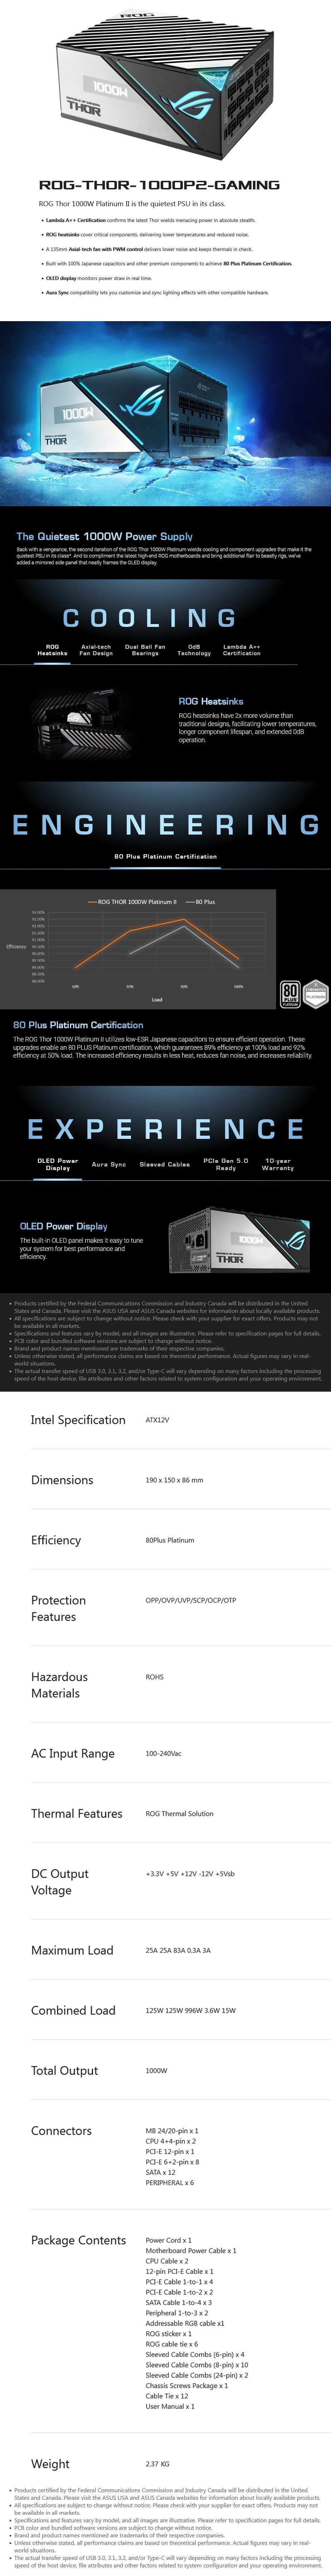 A large marketing image providing additional information about the product ASUS ROG Thor II 1000W Platinum ATX Modular PSU - Additional alt info not provided